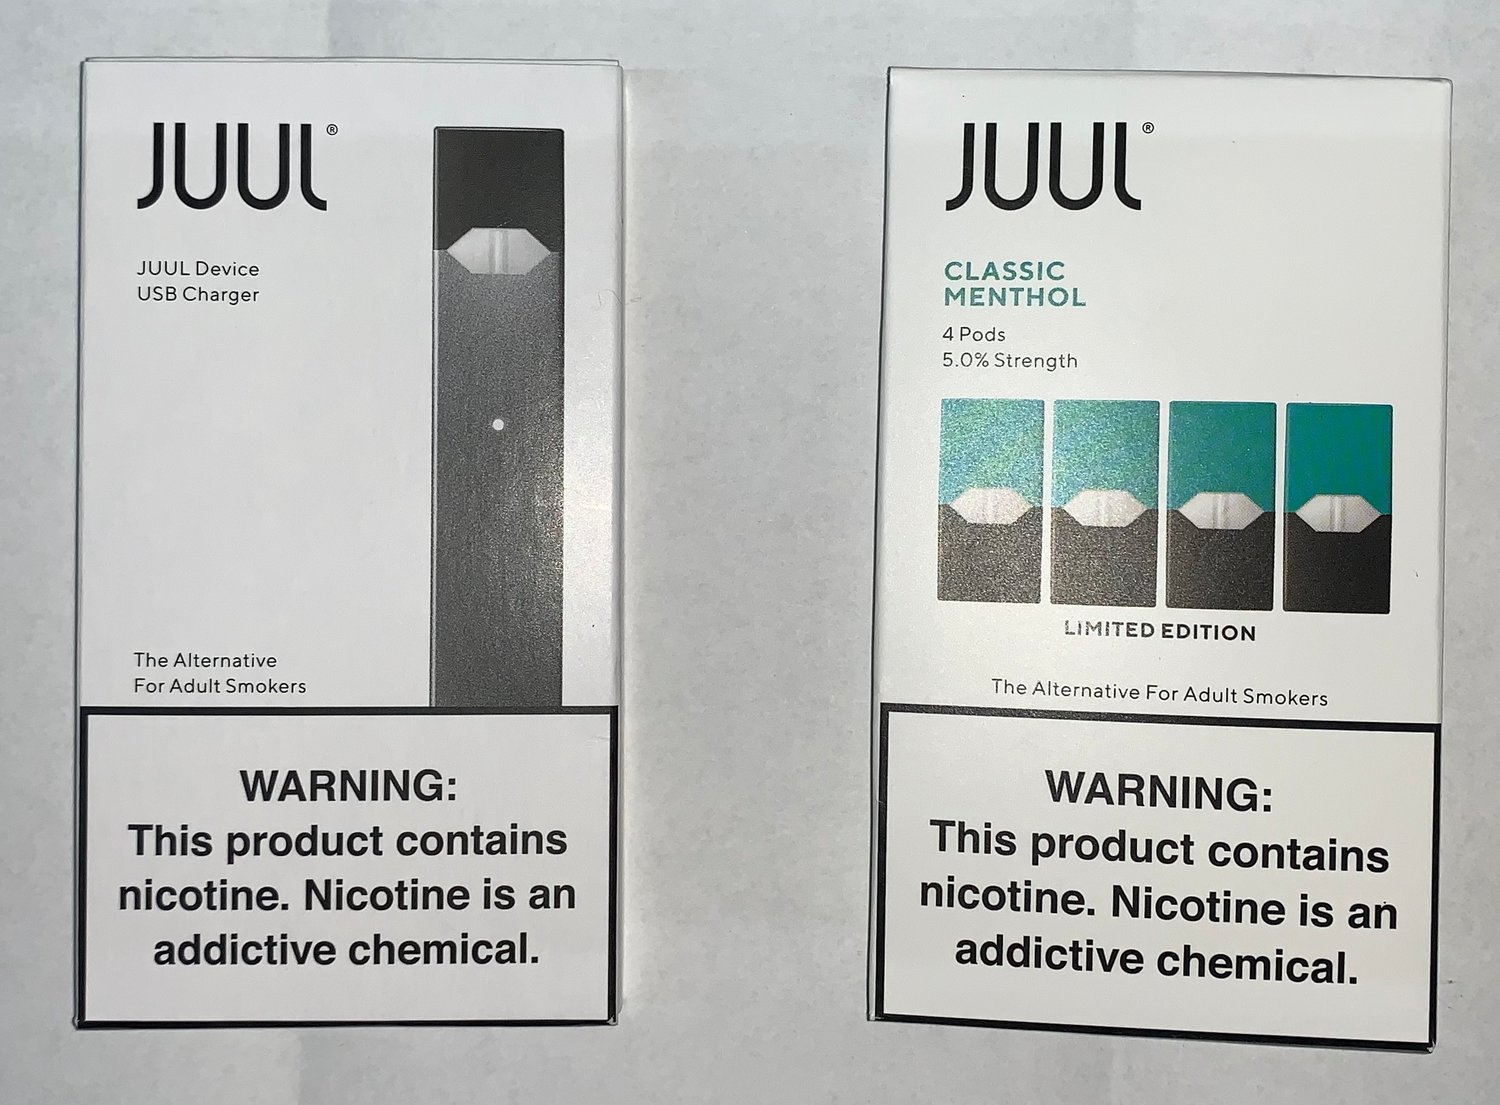 Among the items told were JUUL vaping devices and liquid nicotine pads, police said.